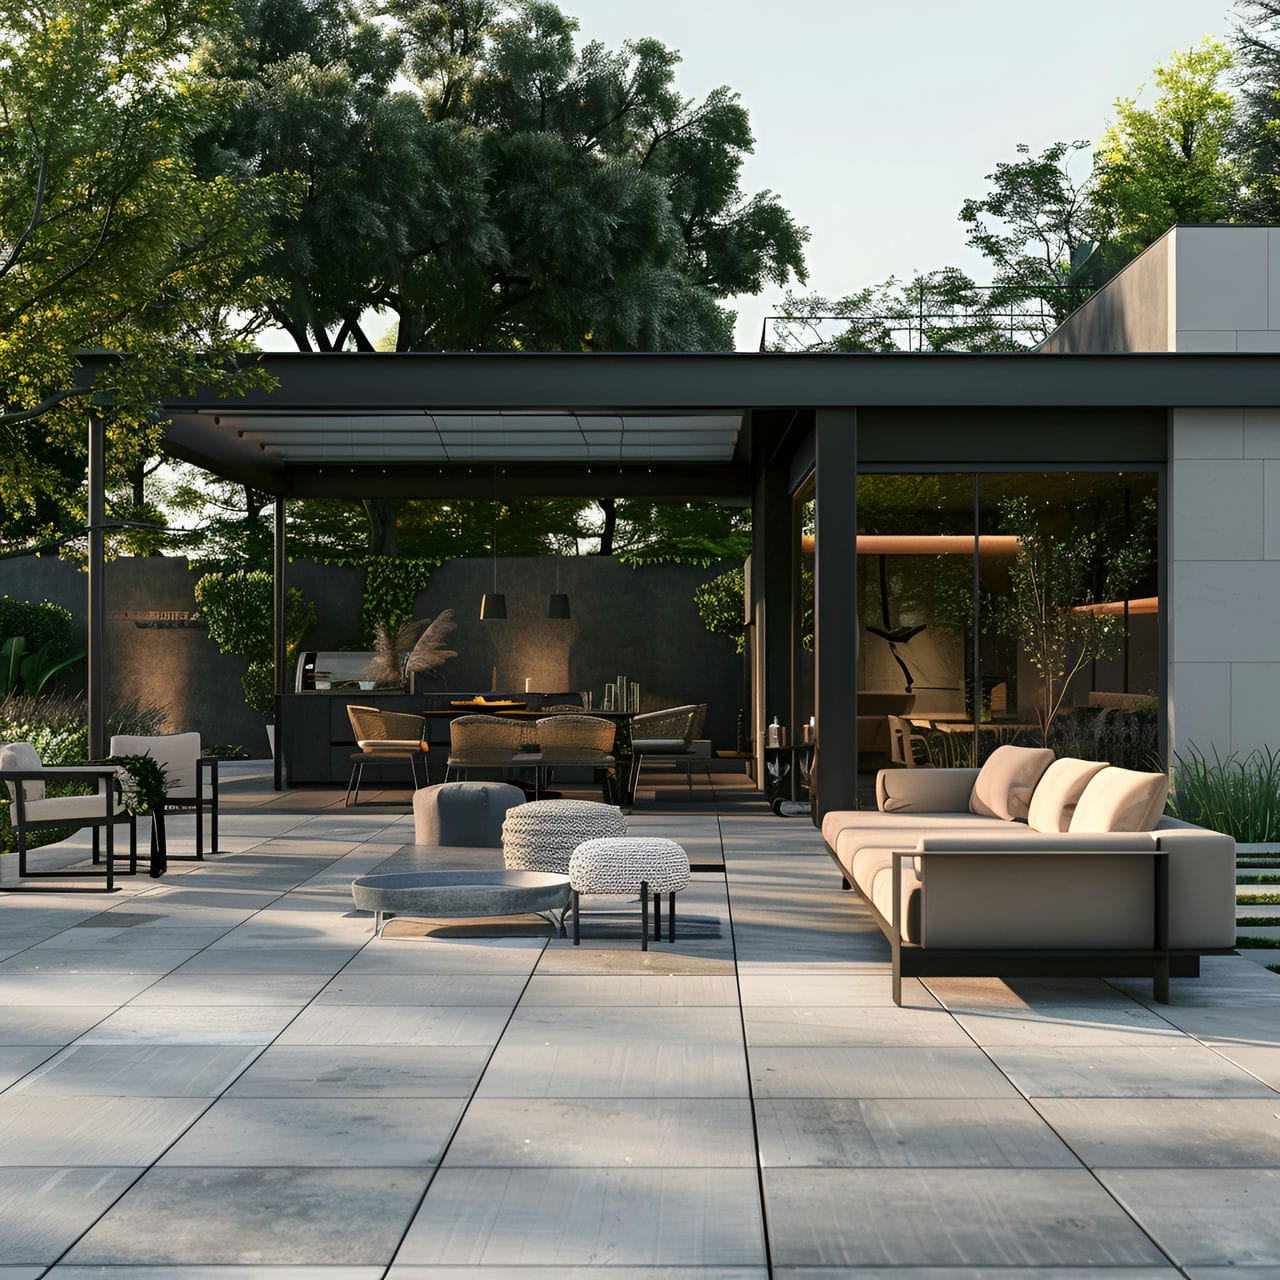 Patio: size, functionality, uses, furniture and renovation